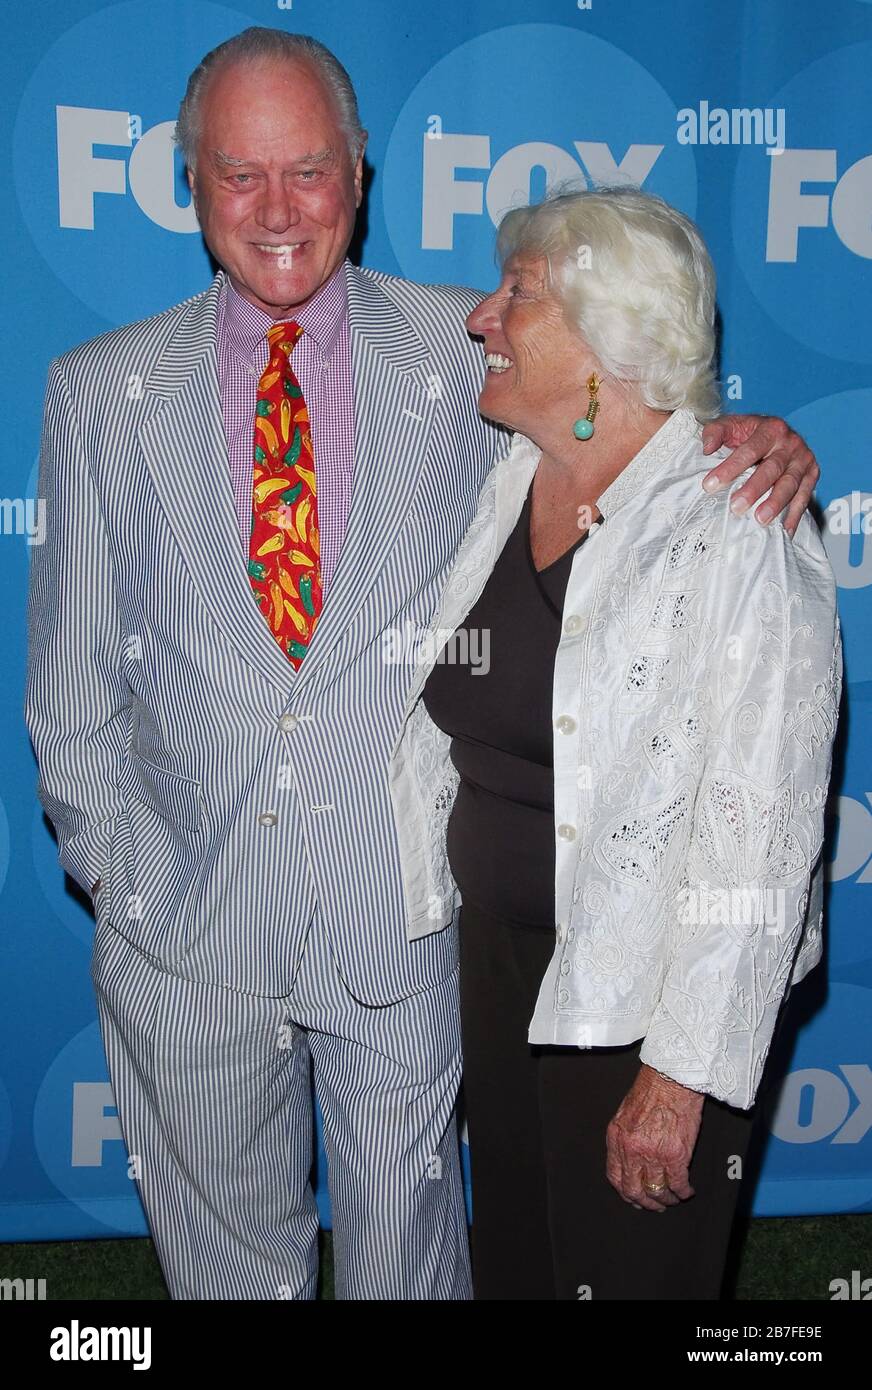 Larry Hagman and Maj Axelsson at the FOX 2006 Summer TCA All Star Party held at the Ritz Carlton Huntington Hotel, Horseshoe Garden in Pasadena, CA. The event took place on Tuesday, July 25, 2006.  Photo by: SBM / PictureLux Stock Photo